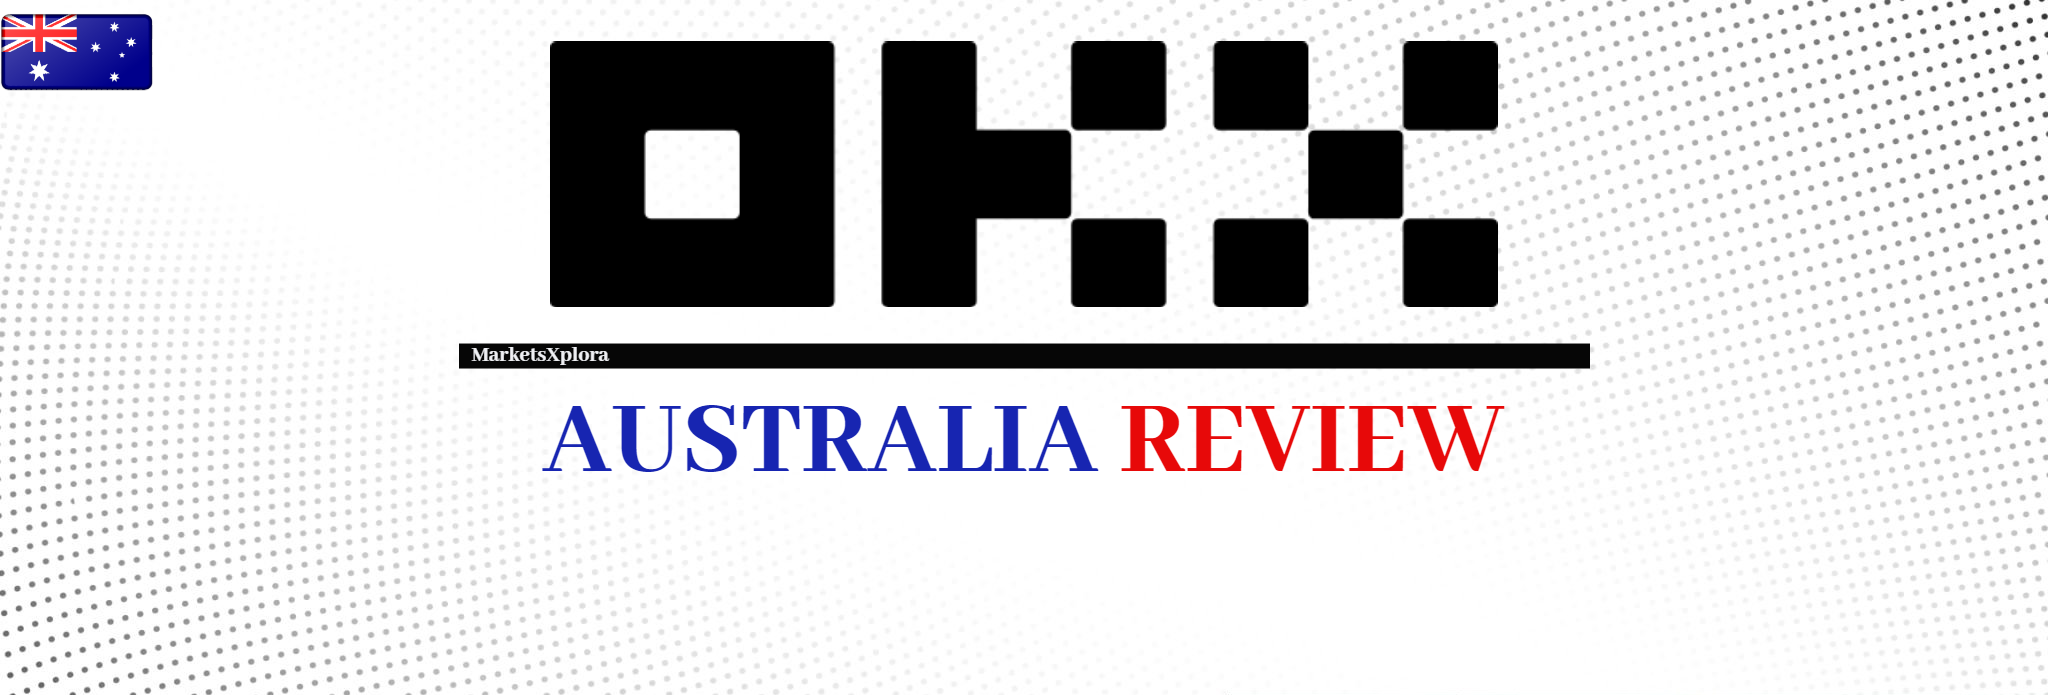 Is OKX the right crypto exchange for you? Our comprehensive OKX Australia review examines everything from regulatory compliance to customer support and additional features.